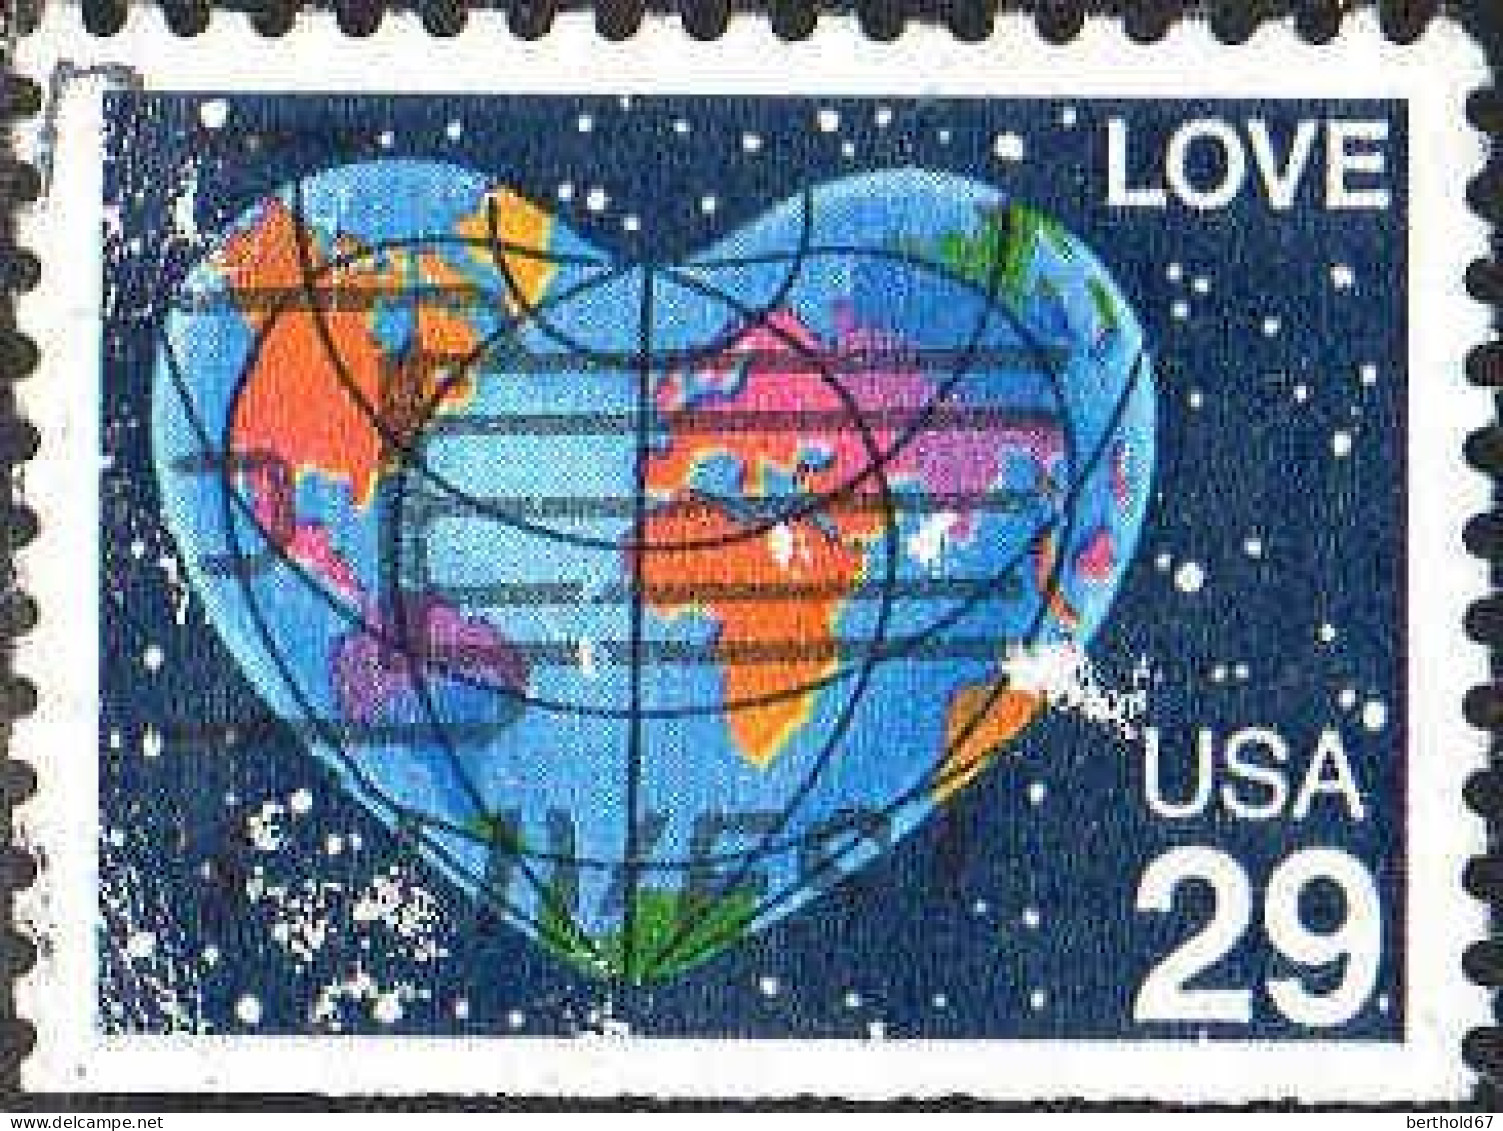 USA Poste Obl Yv:1938a Mi:2132Ero Love (Obl.mécanique) - Used Stamps